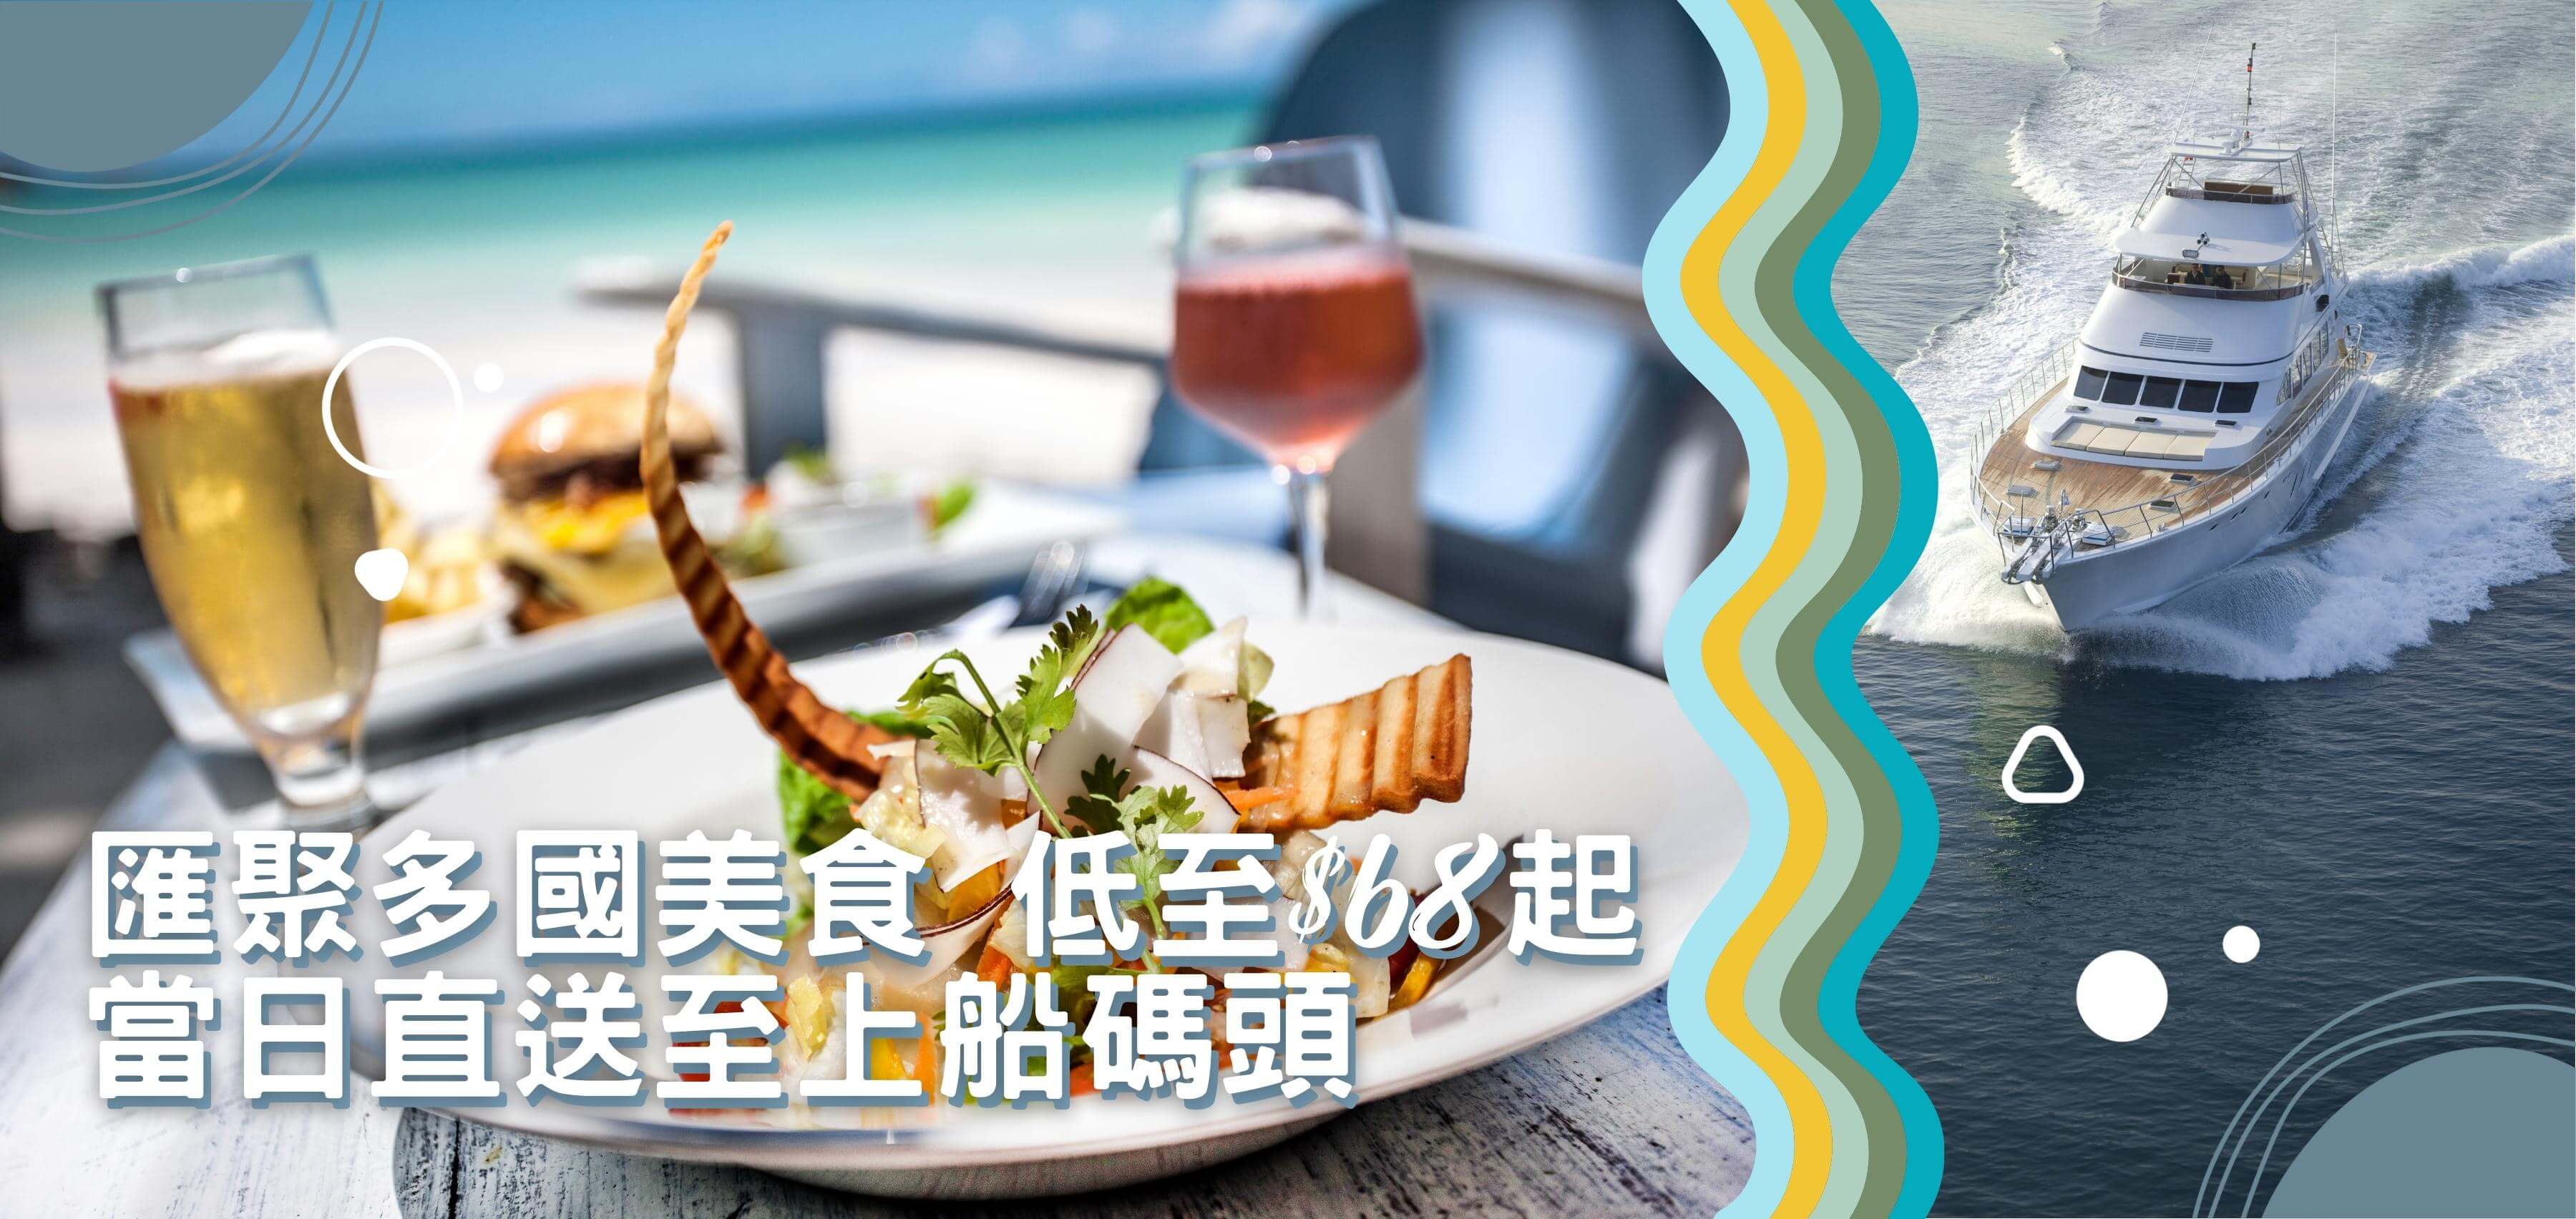 Yacht Holimood - 匯聚多國美食 低至$68起 當日直送至上船碼頭 Gathering International Cuisines! Starting at just $68! Deliver to the boarding pier!